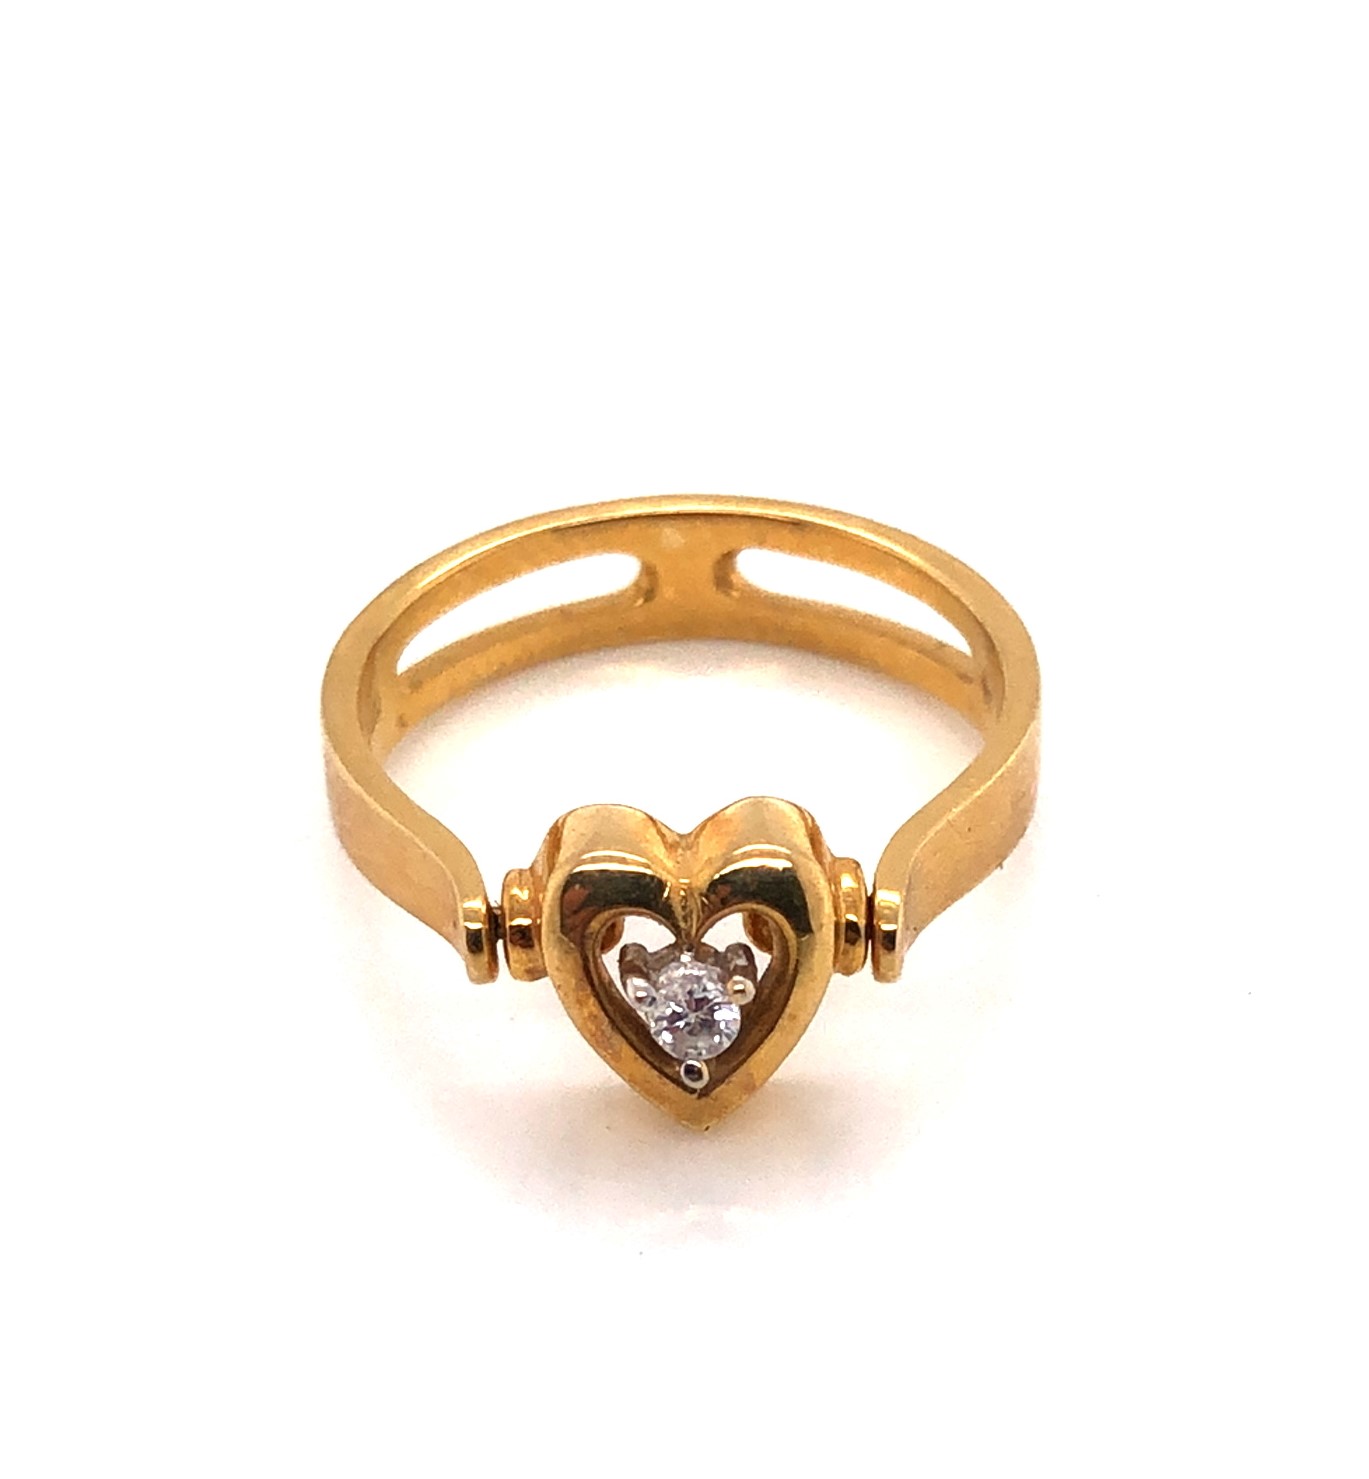 A DIAMOND SET HEART SHAPE SPINNER RING. UNHALLMARKED STAMPED 18ct AND ASSESSED AS 18ct YELLOW